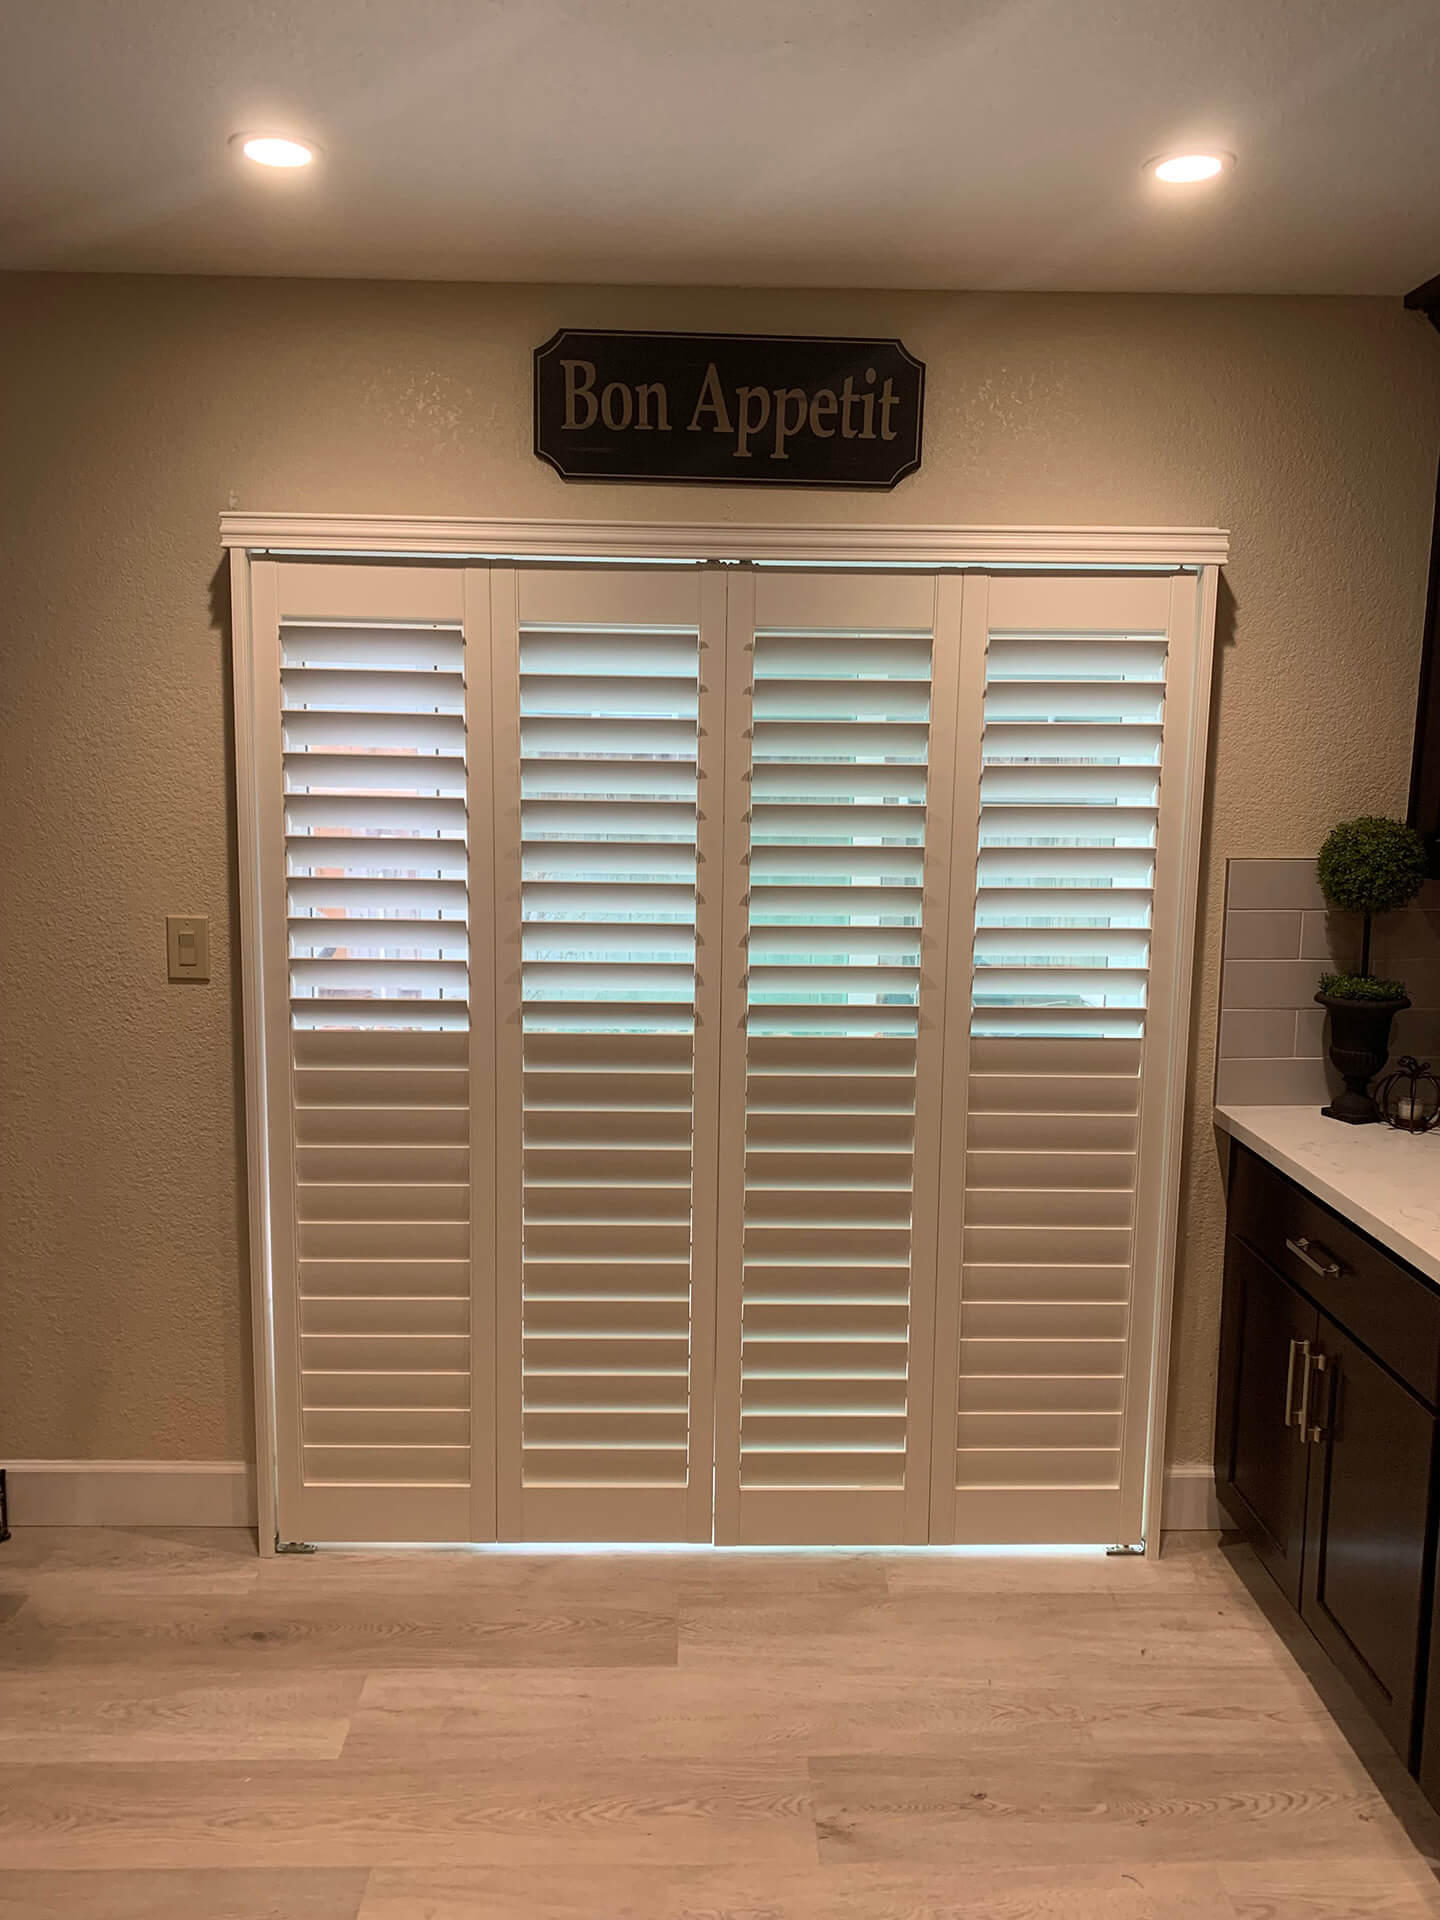 A large sliding door covered with shutters and a sign that says 'Bon Appetit' above the doors.